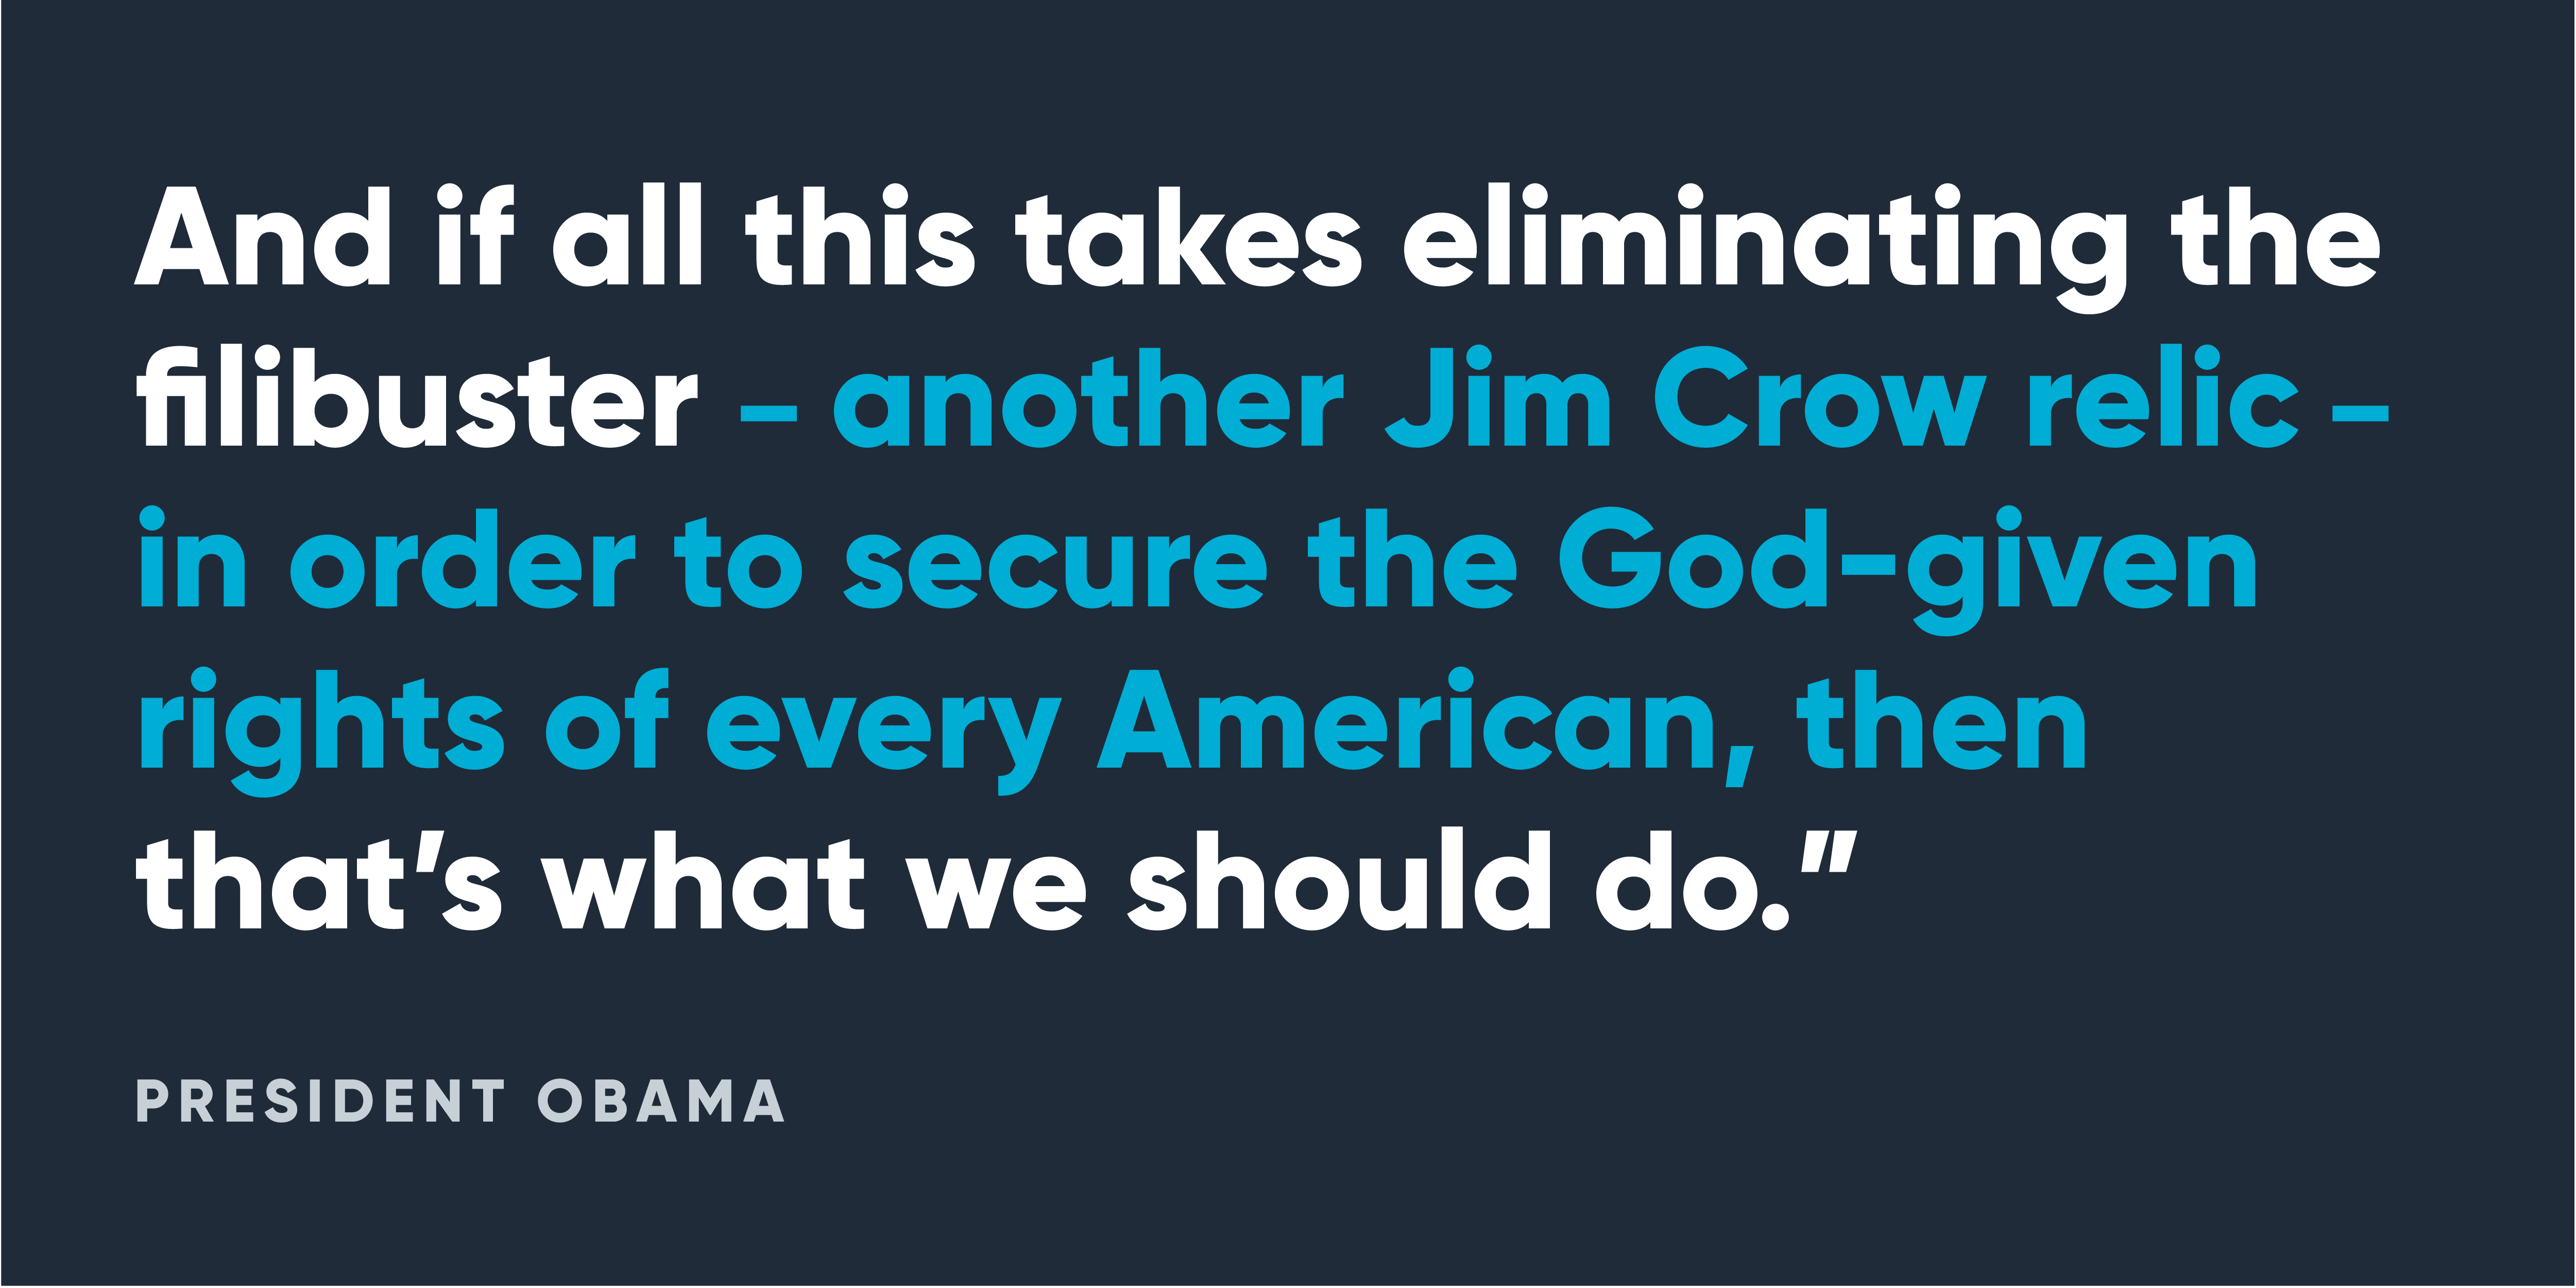 And if all this takes eliminating the filibuster -- another Jim Crow relic -- in order to secure the God-given rights of every American, then that’s what we should do.”   President Obama